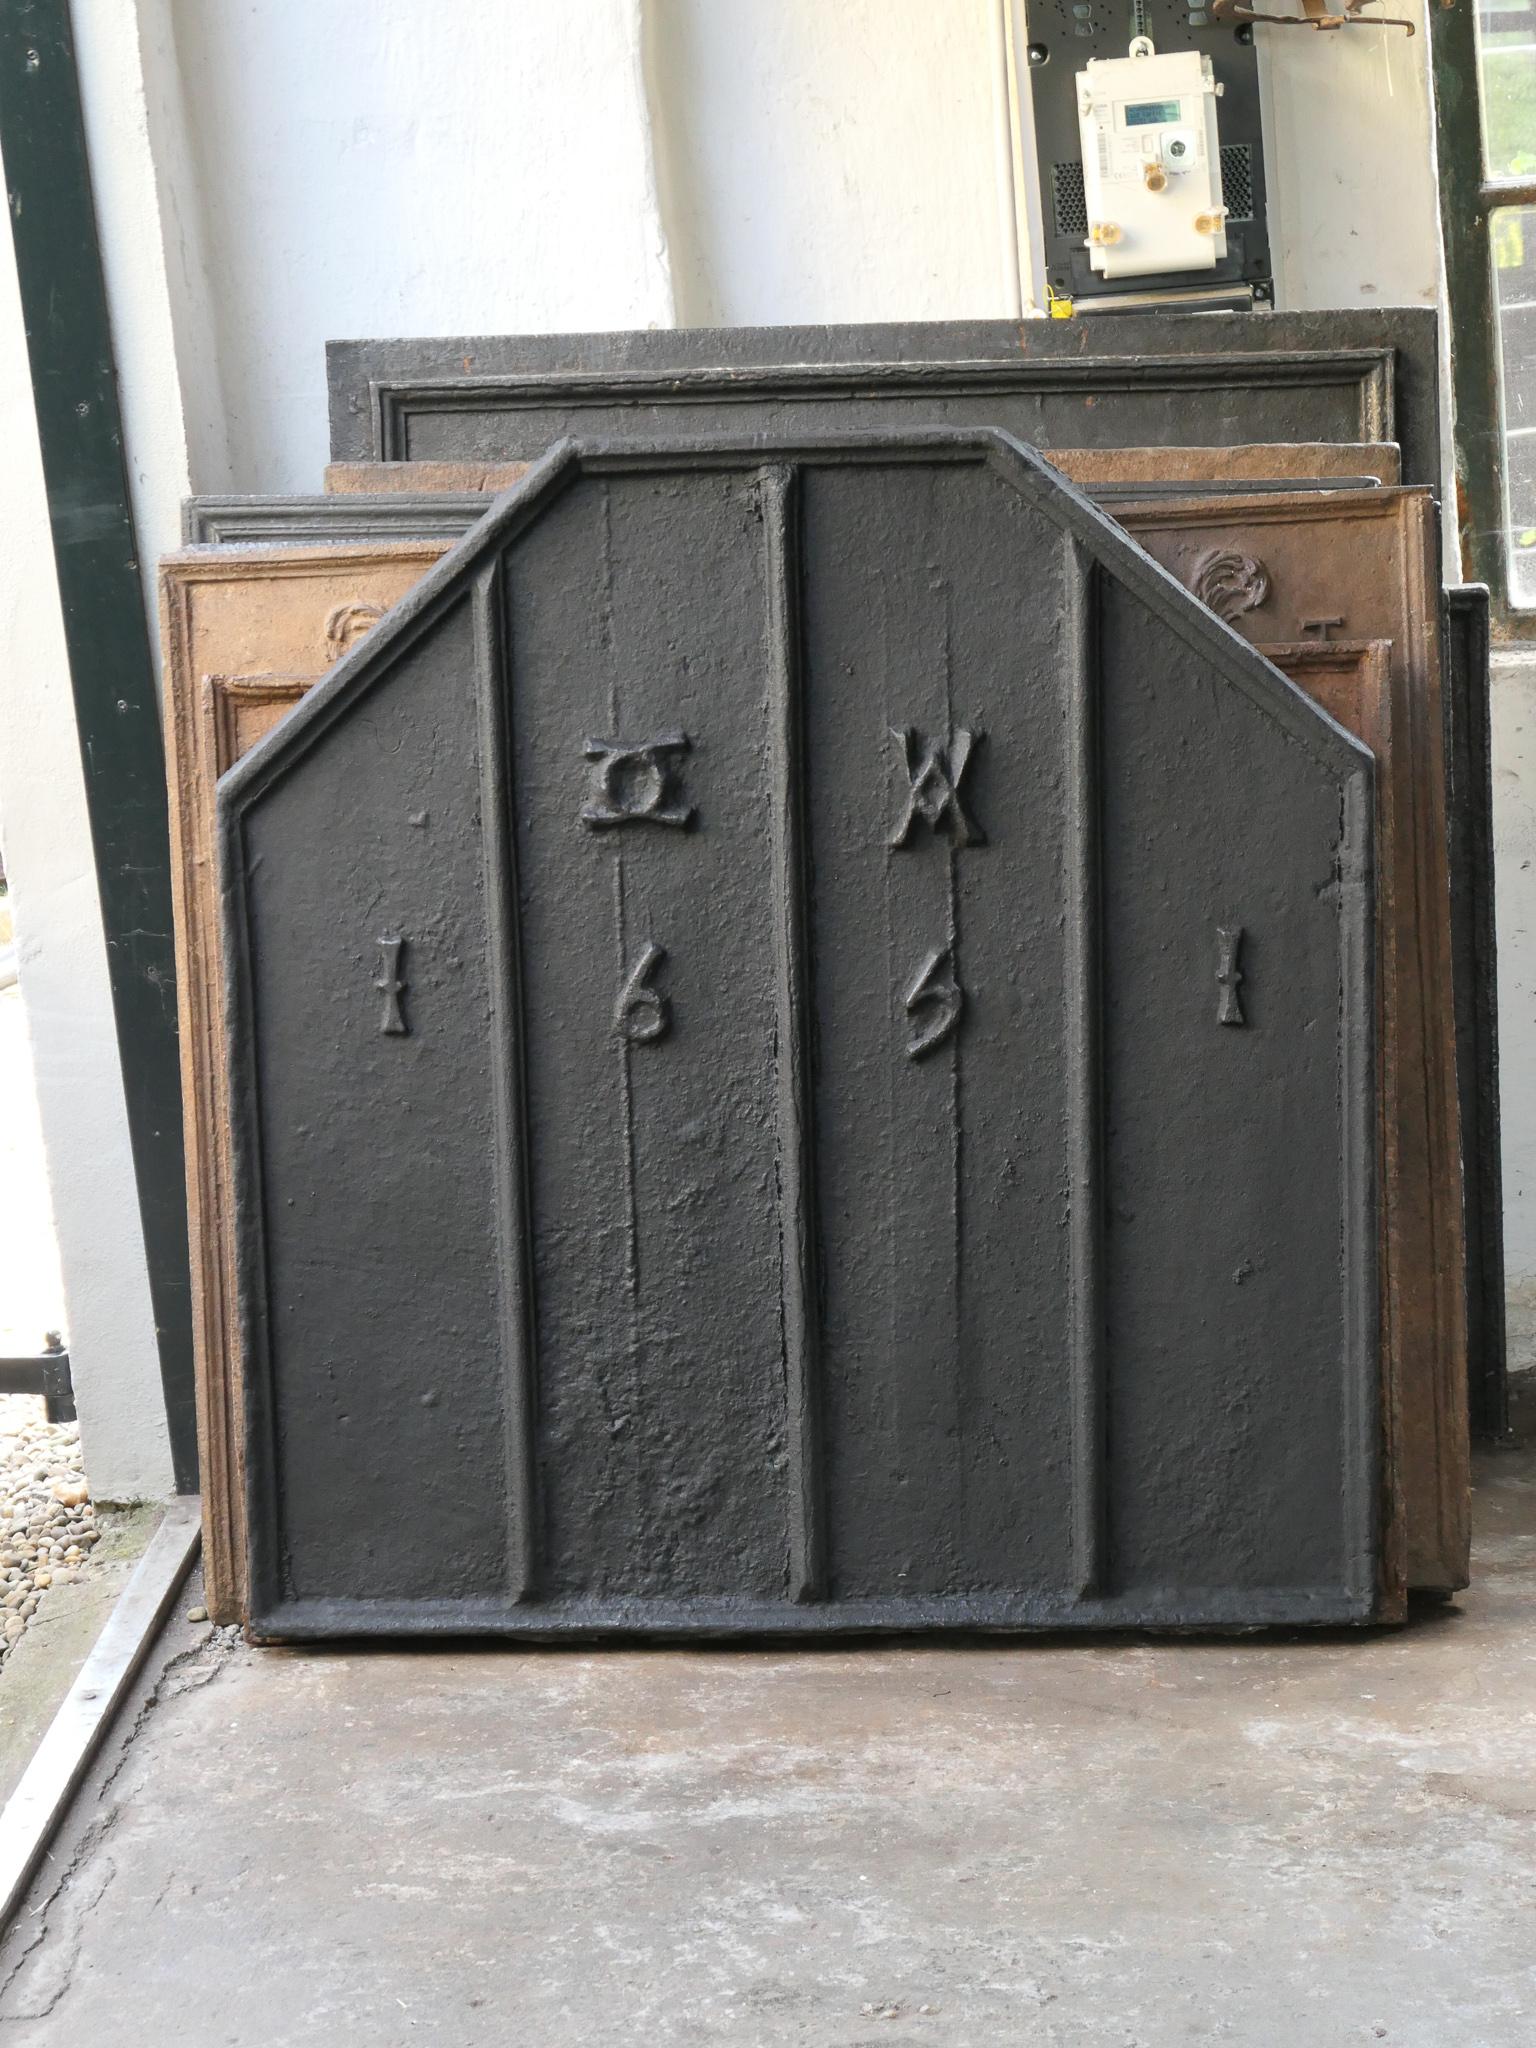 Late 19th or early 20th century French Louis XIII style fireback with an unknown coat of arms. The fireback is made of cast iron and has a black patina. The condition is good, no cracks.

All our products that weigh 66 kg / 146 lbs or more are